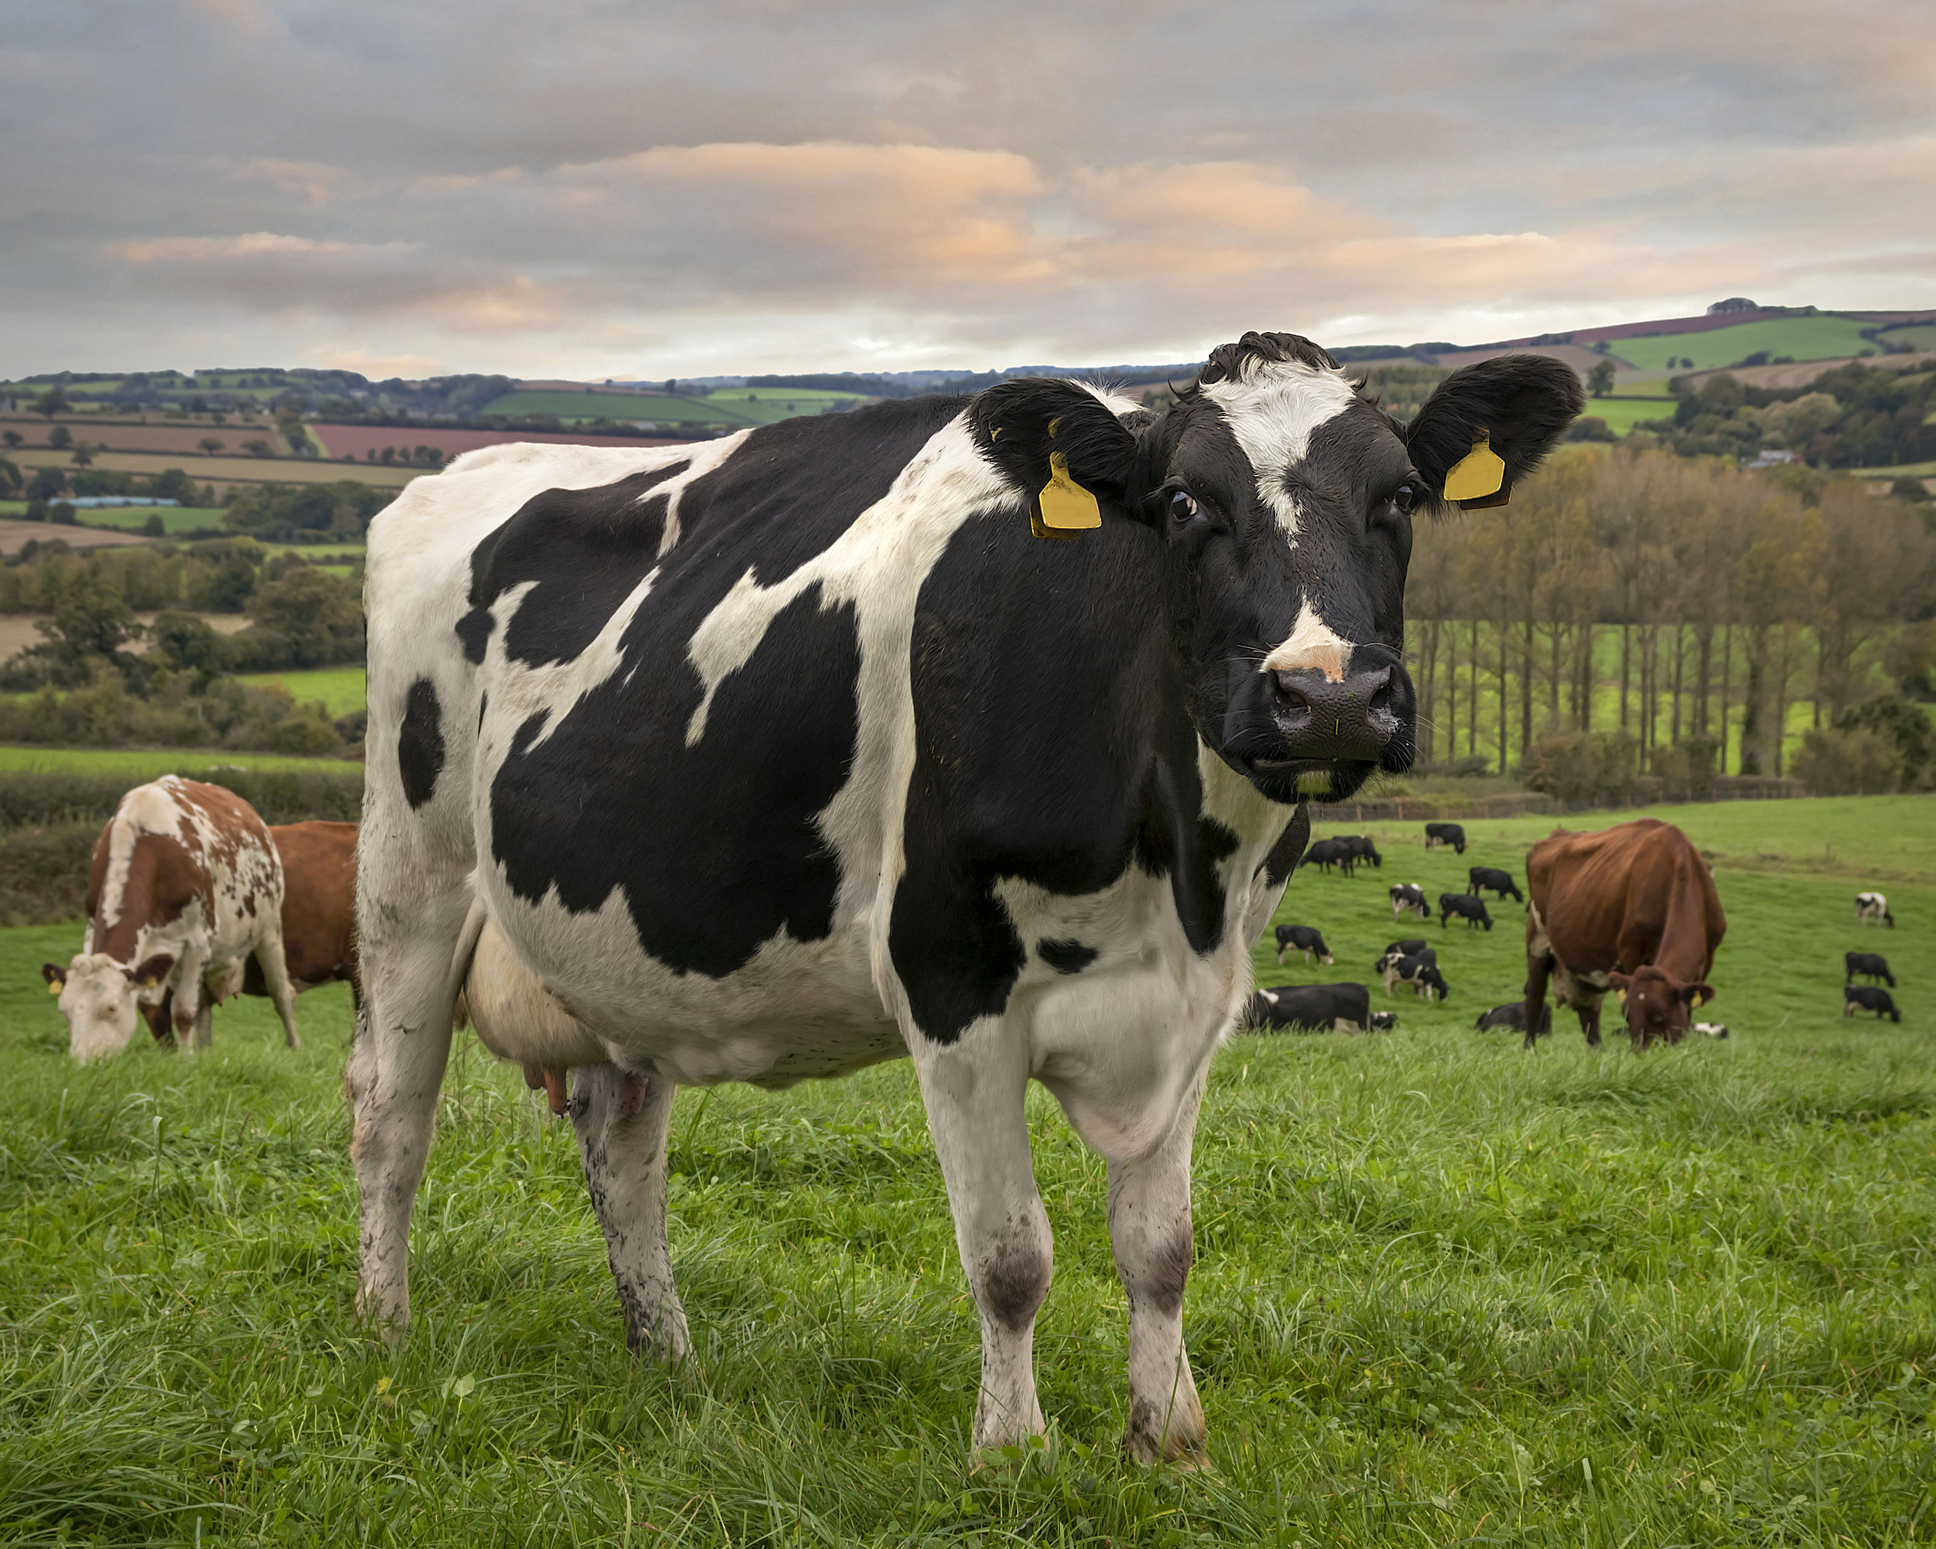 Elderly Man Banned From British Farms For Serially Molesting Innocent Cattle